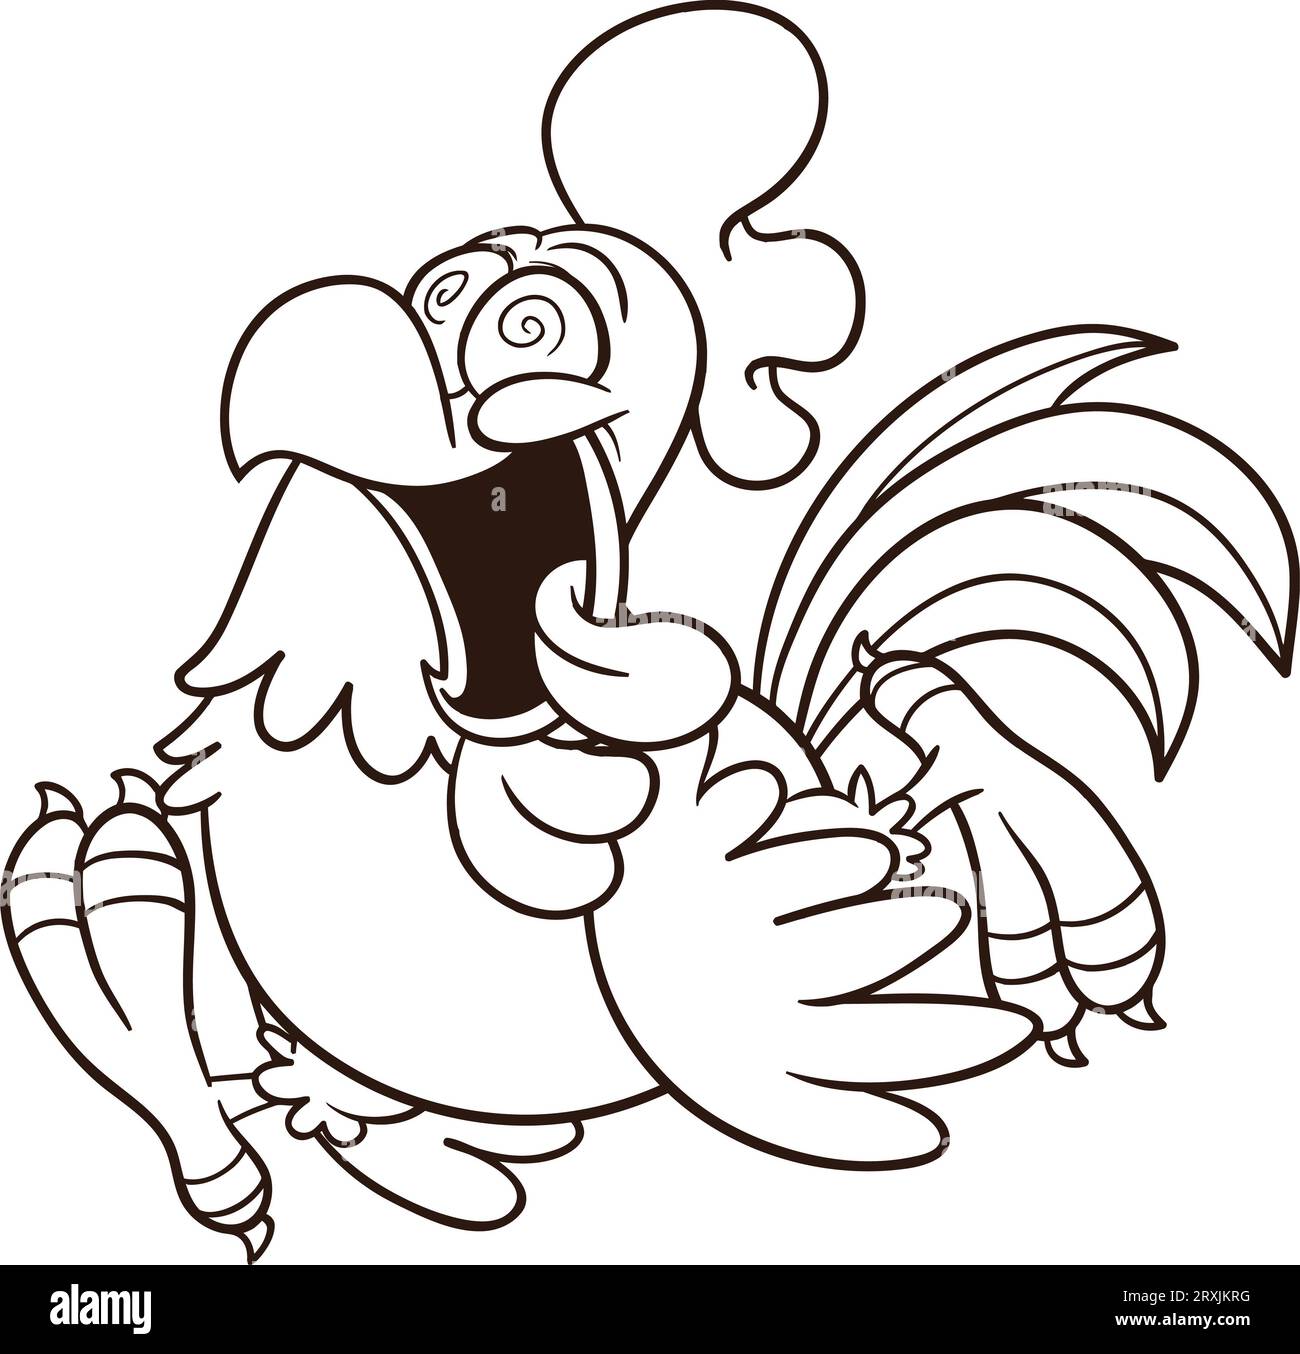 Cute cartoon rooster coloring page for kids Stock Photo